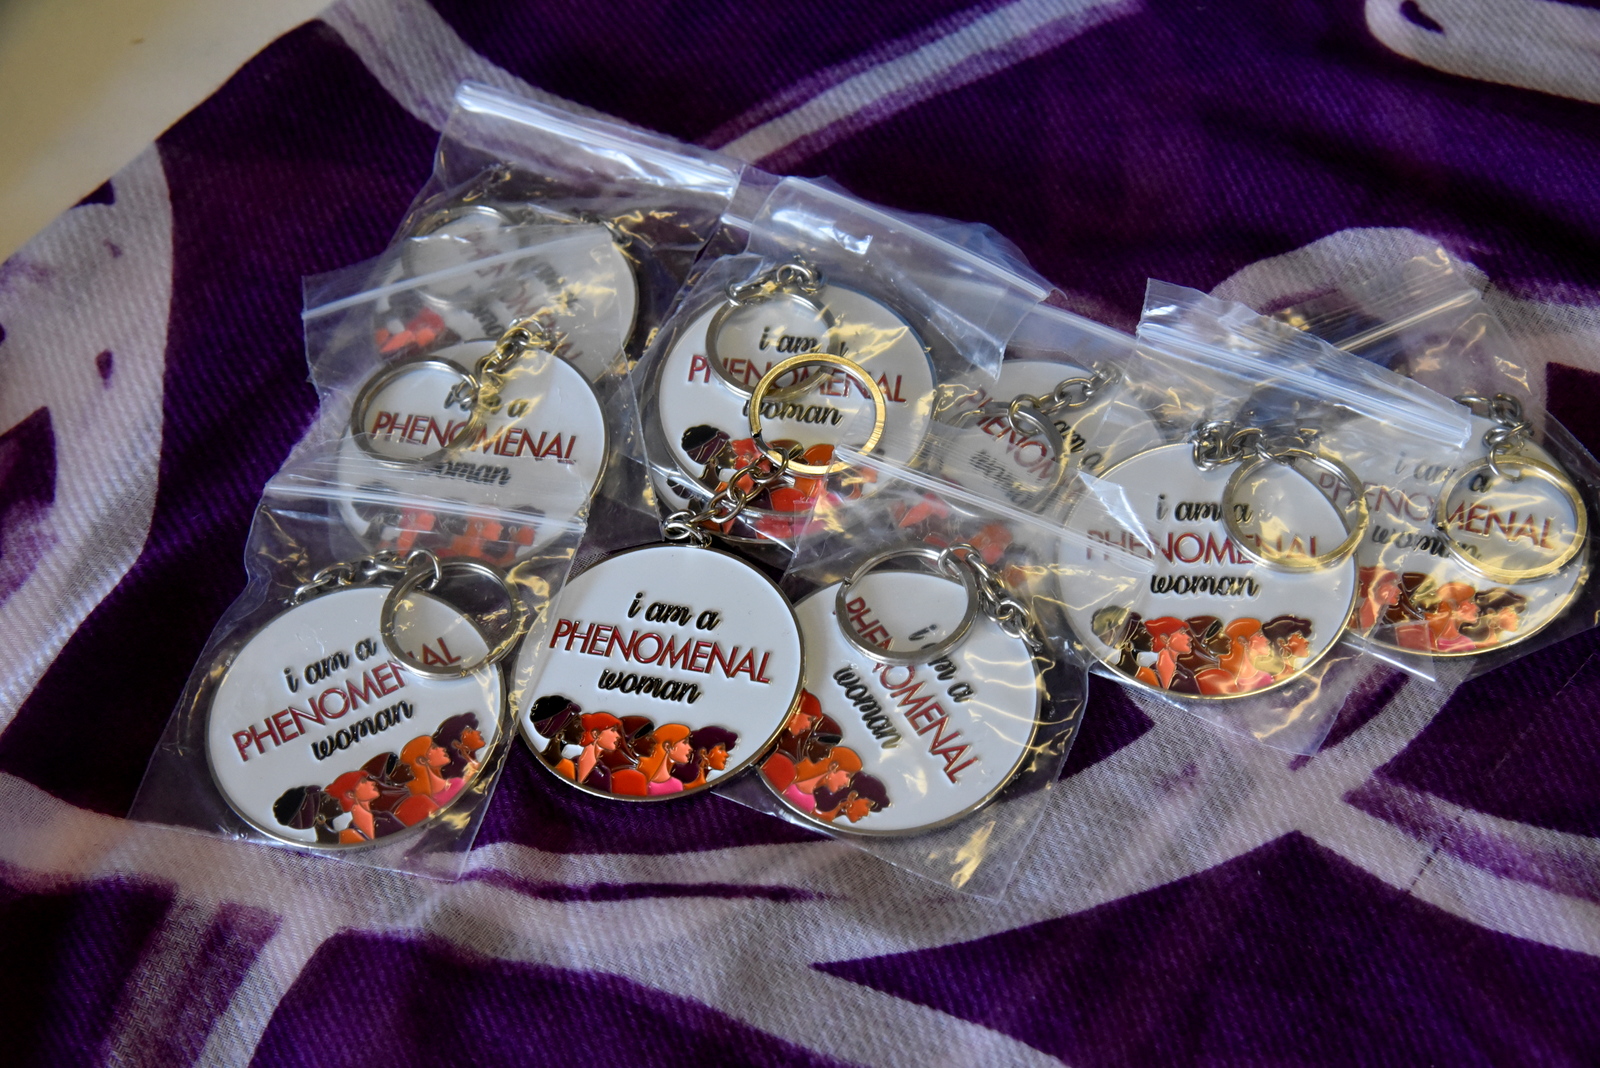 I am Phenomenal Woman keychains in a basket at Heidi's Walk for Hope September 2023.